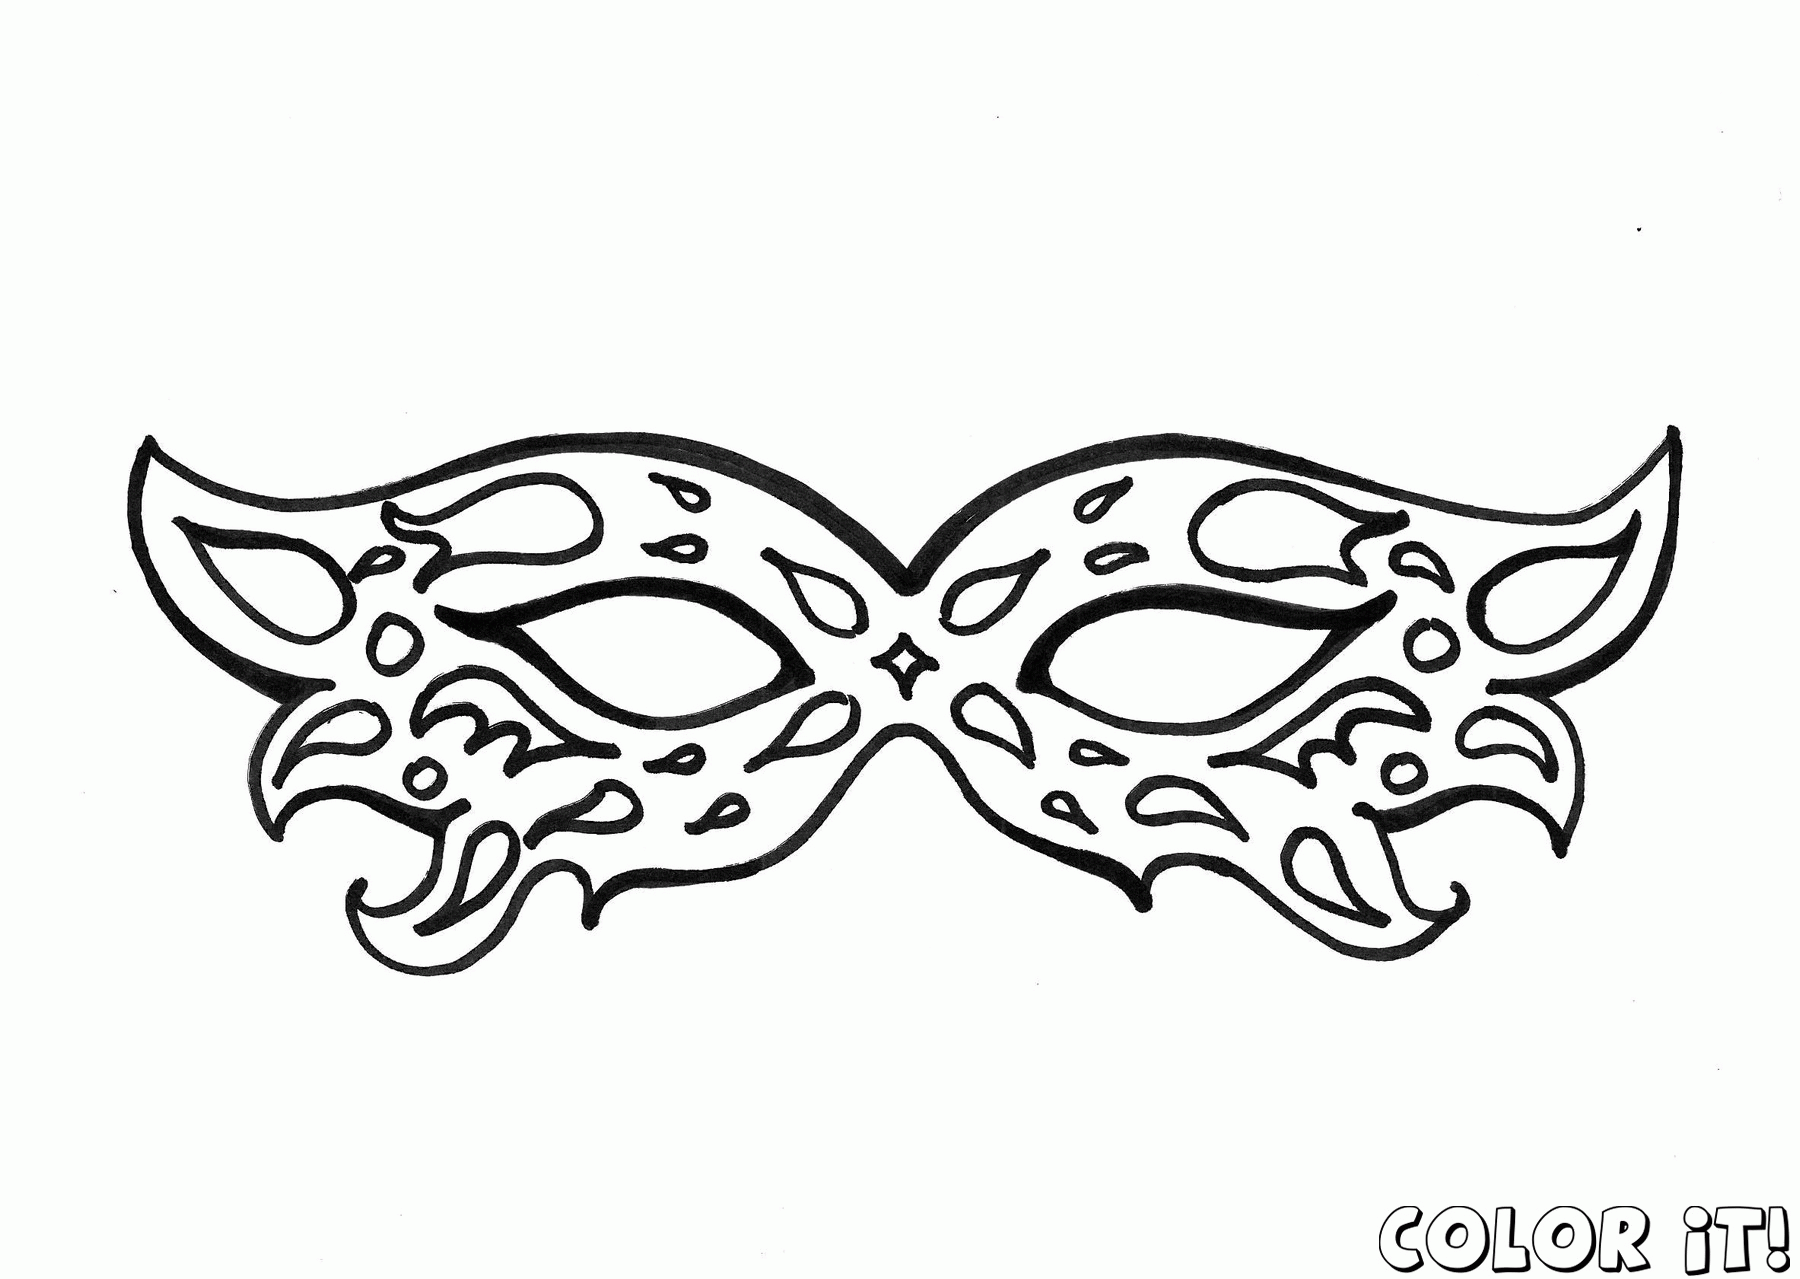 Carnival Mask Coloring Page - High Quality Coloring Pages